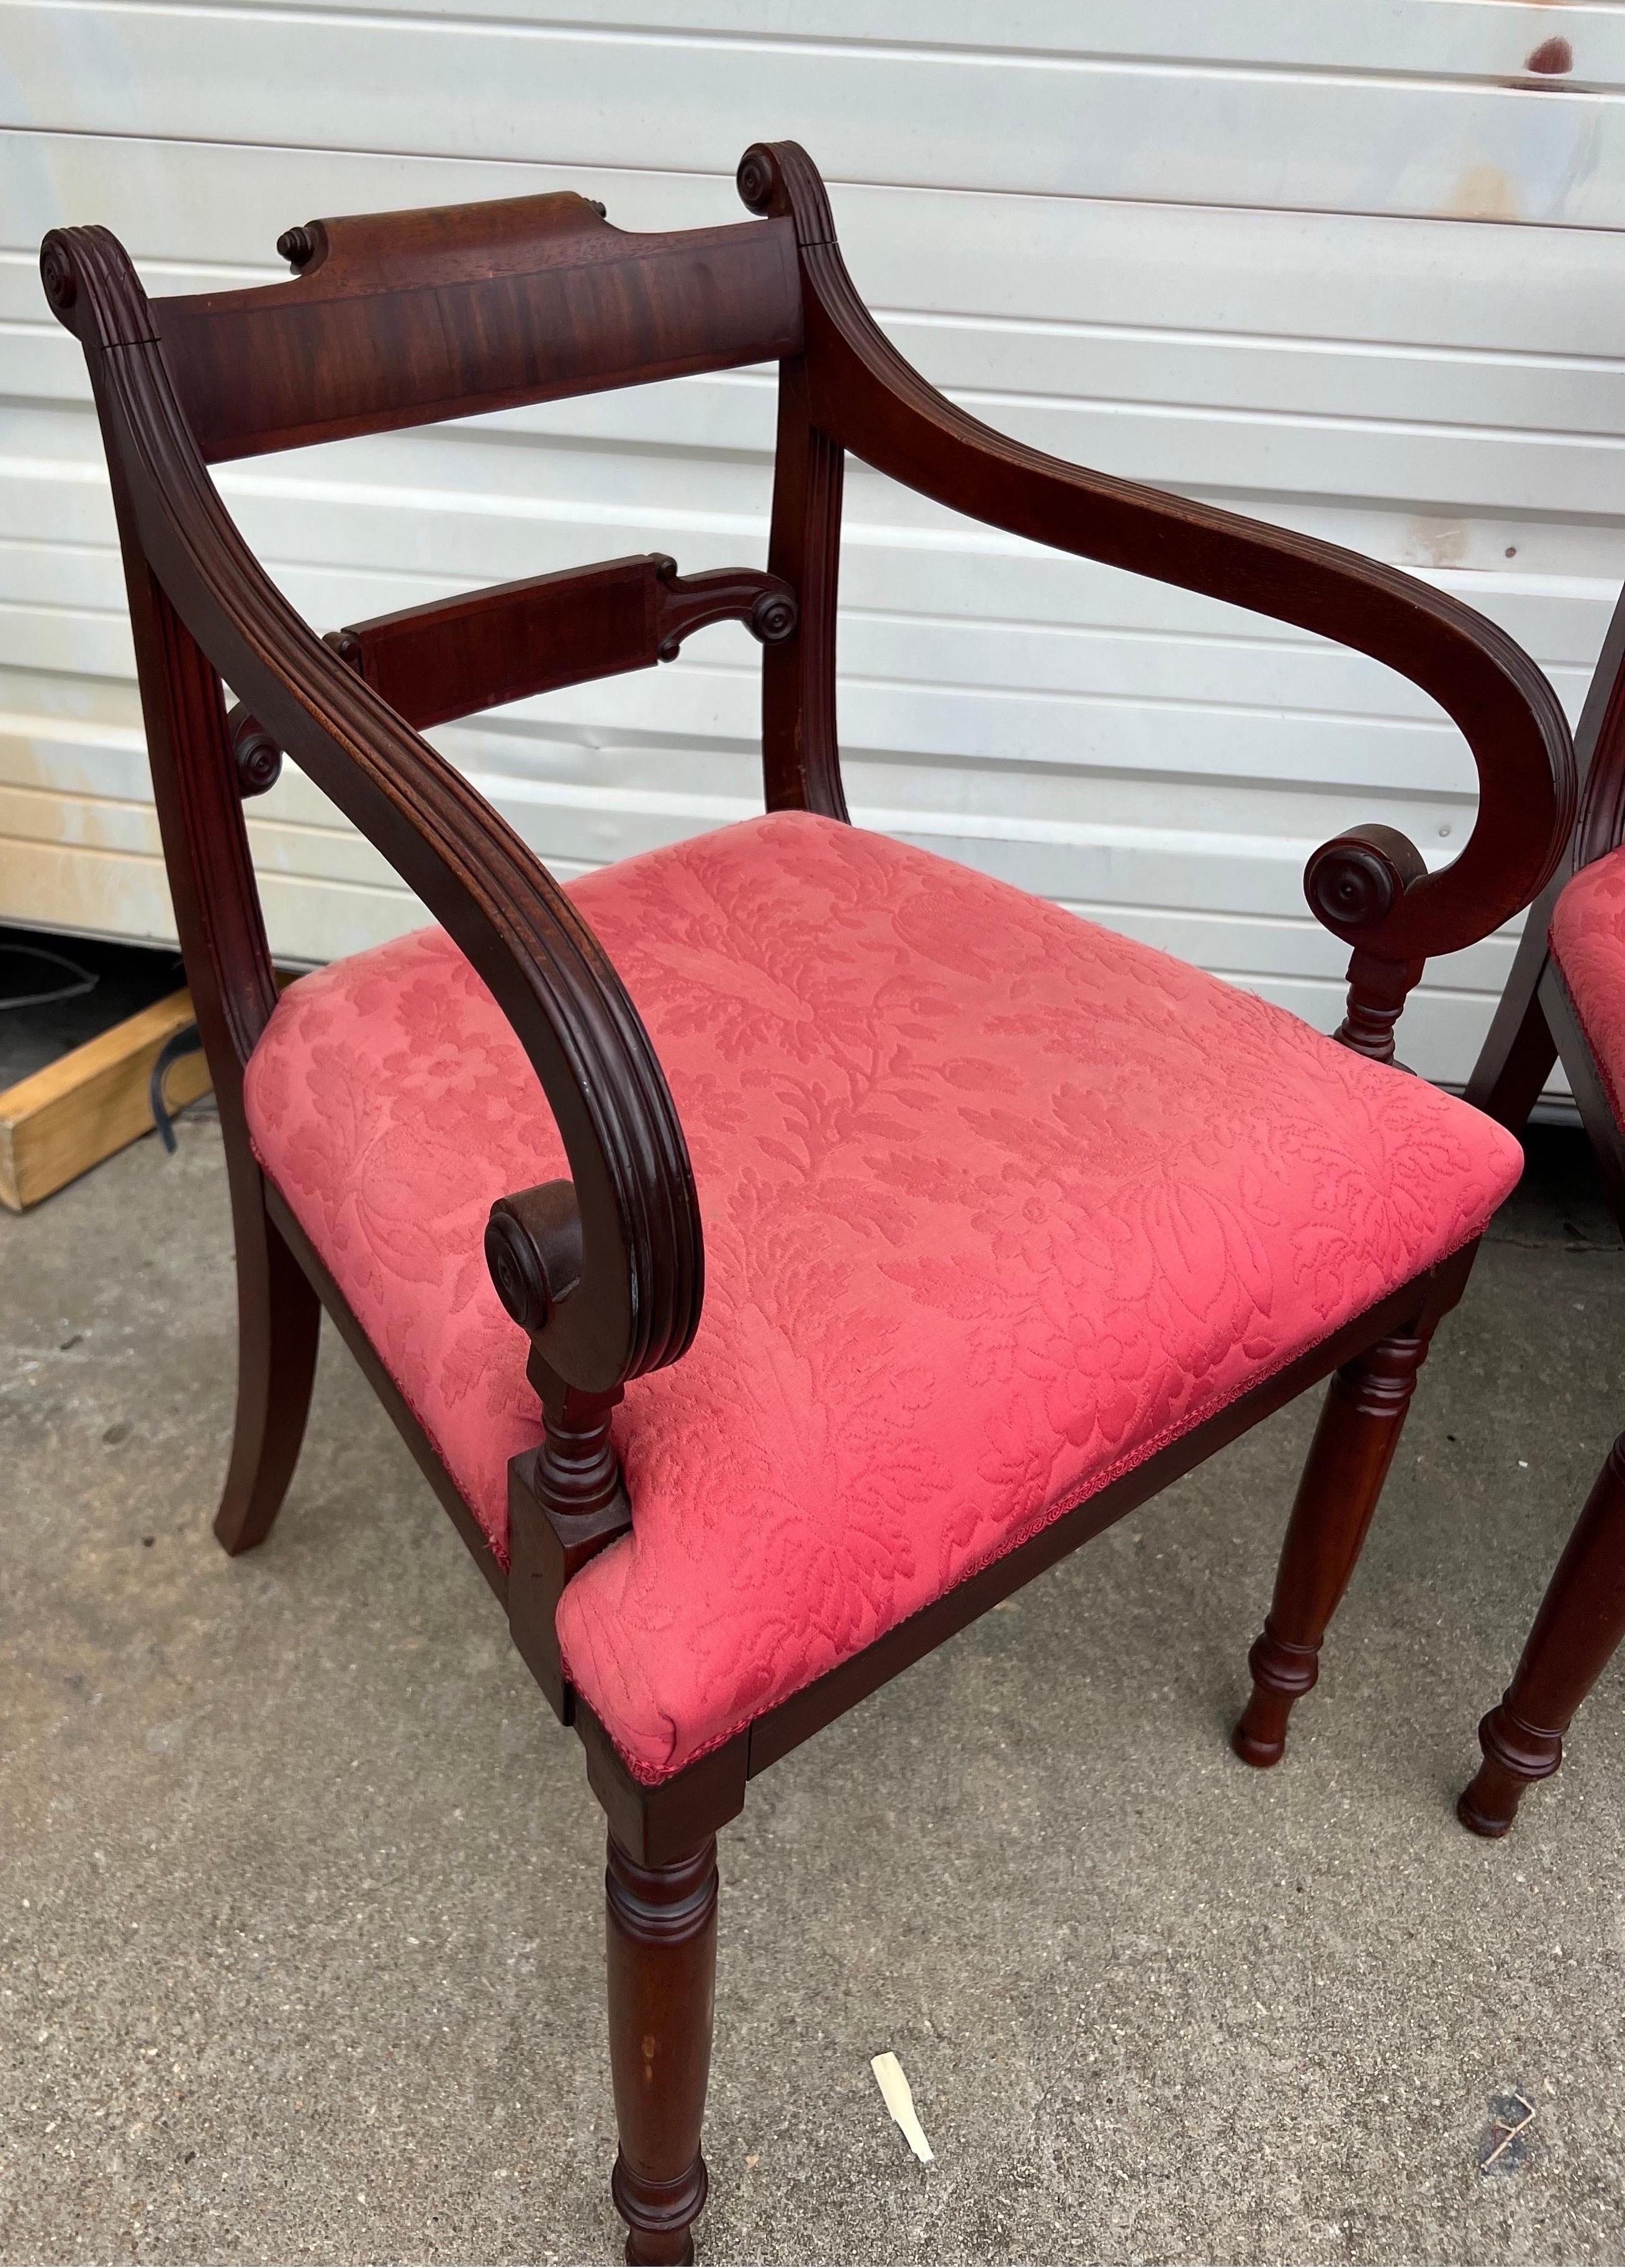 Great set of 8 19th century mahogany English Regency dining chairs with tablet formed backs, scrolled ears and handsome turned legs. 2 Arms and 6 Sides. Great quality mahogany and in their original finish. Ready for reupholstering.